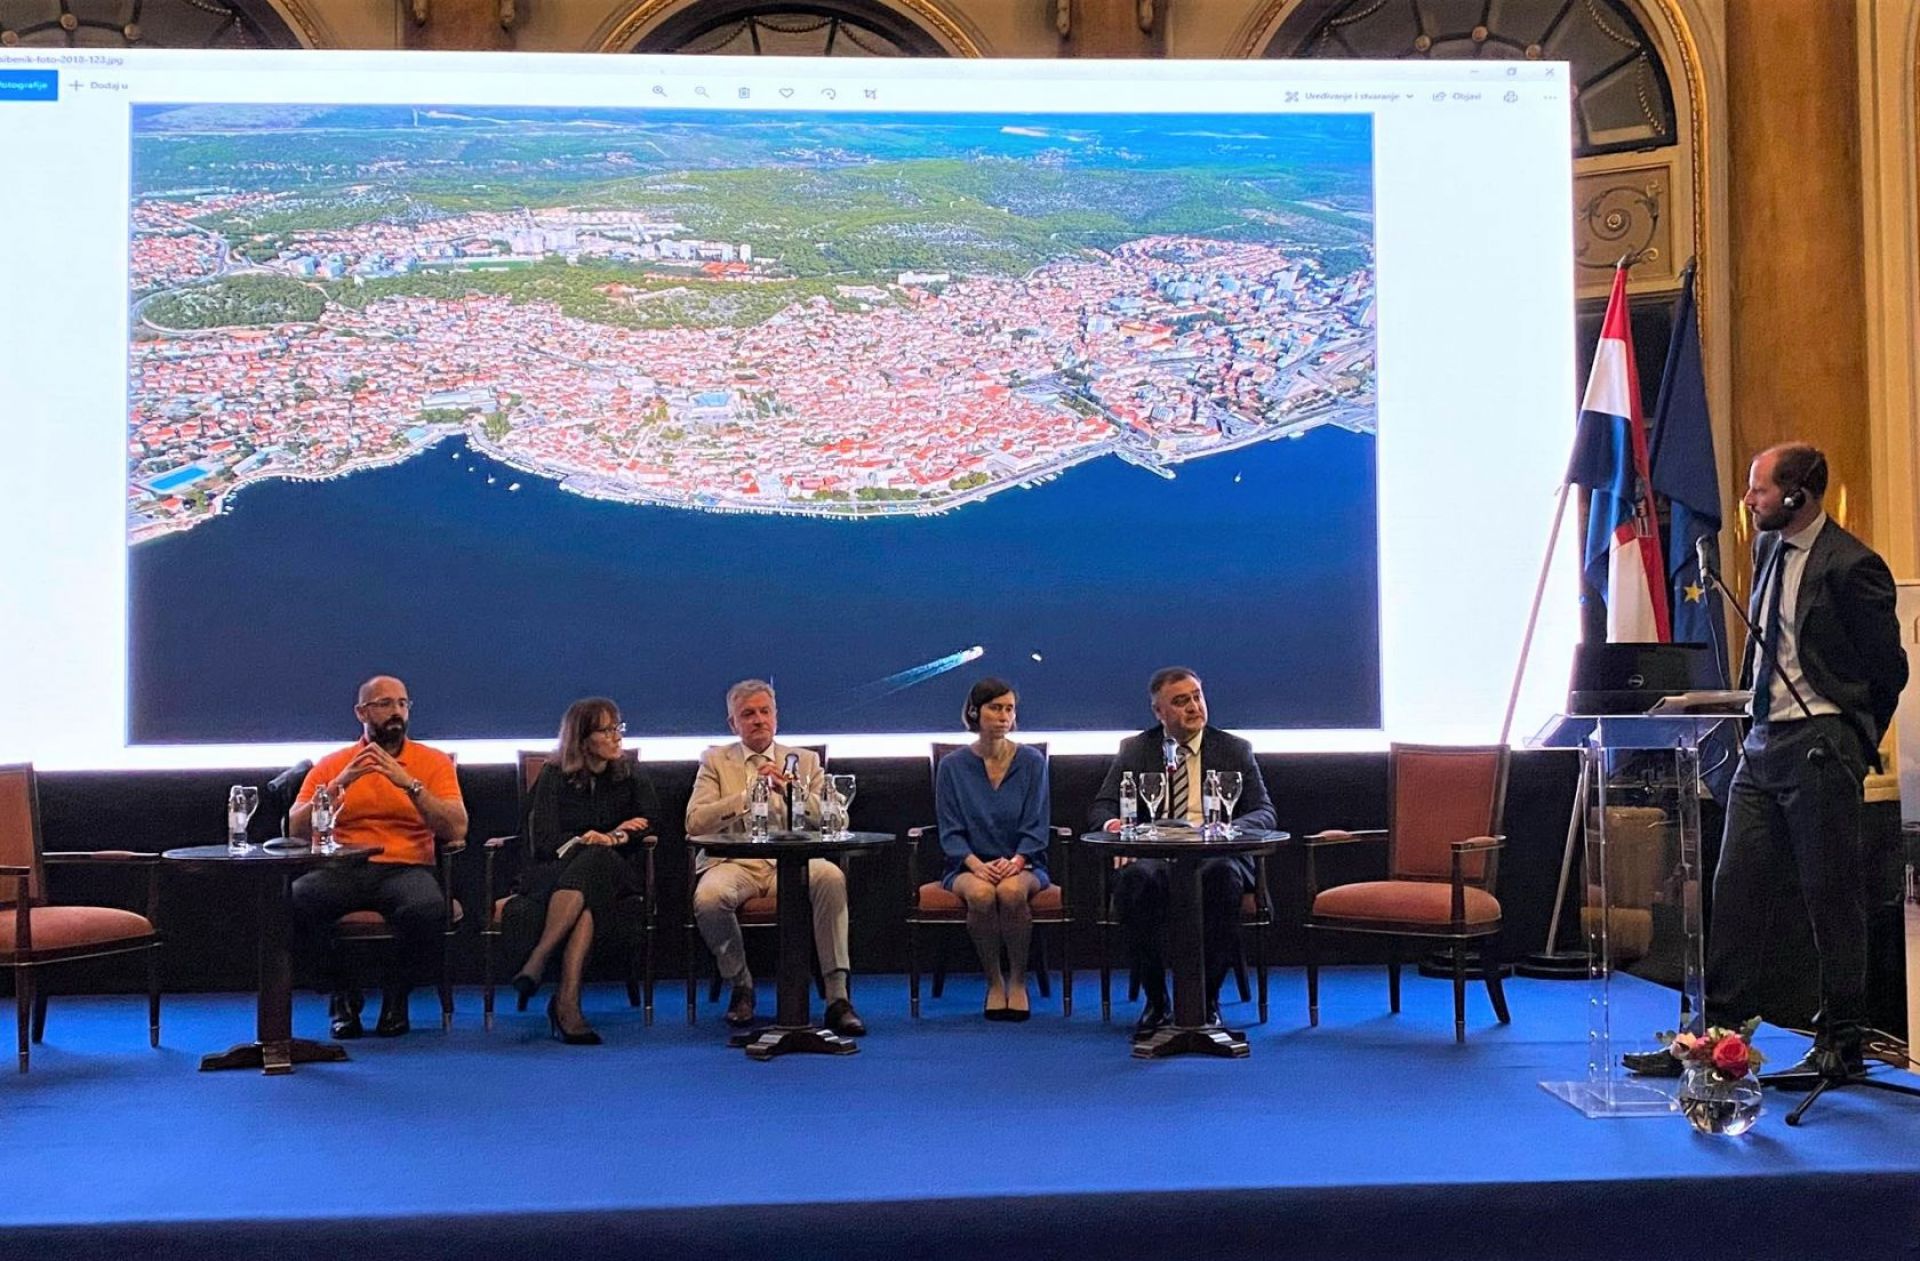 The Batižele project was presented to investors at the sixteenth international conference on real estate development